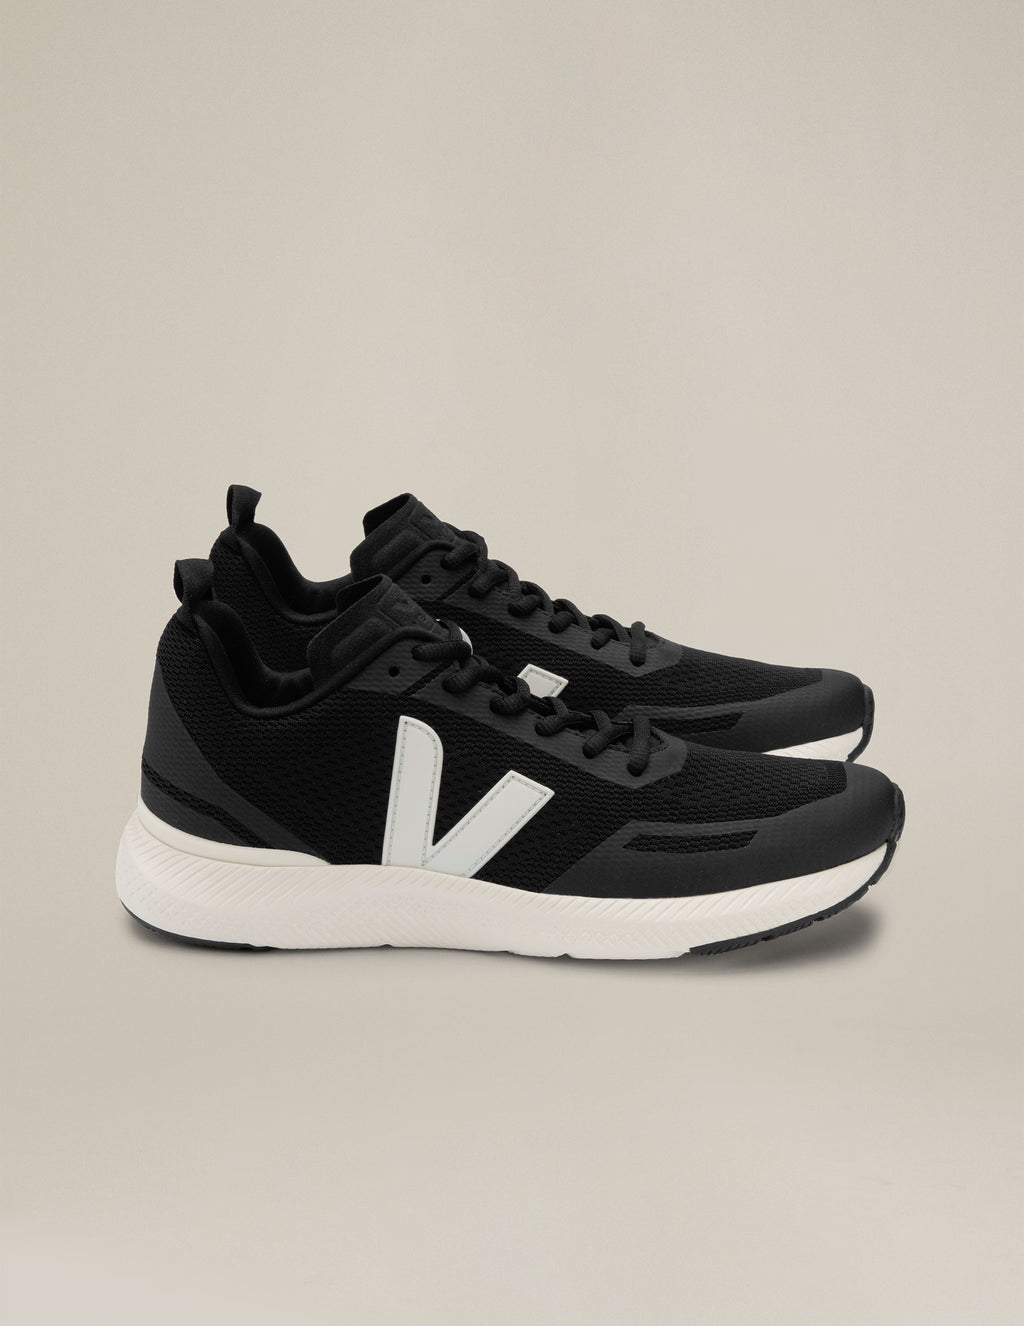 VEJA Impala Sneakers Featured Image